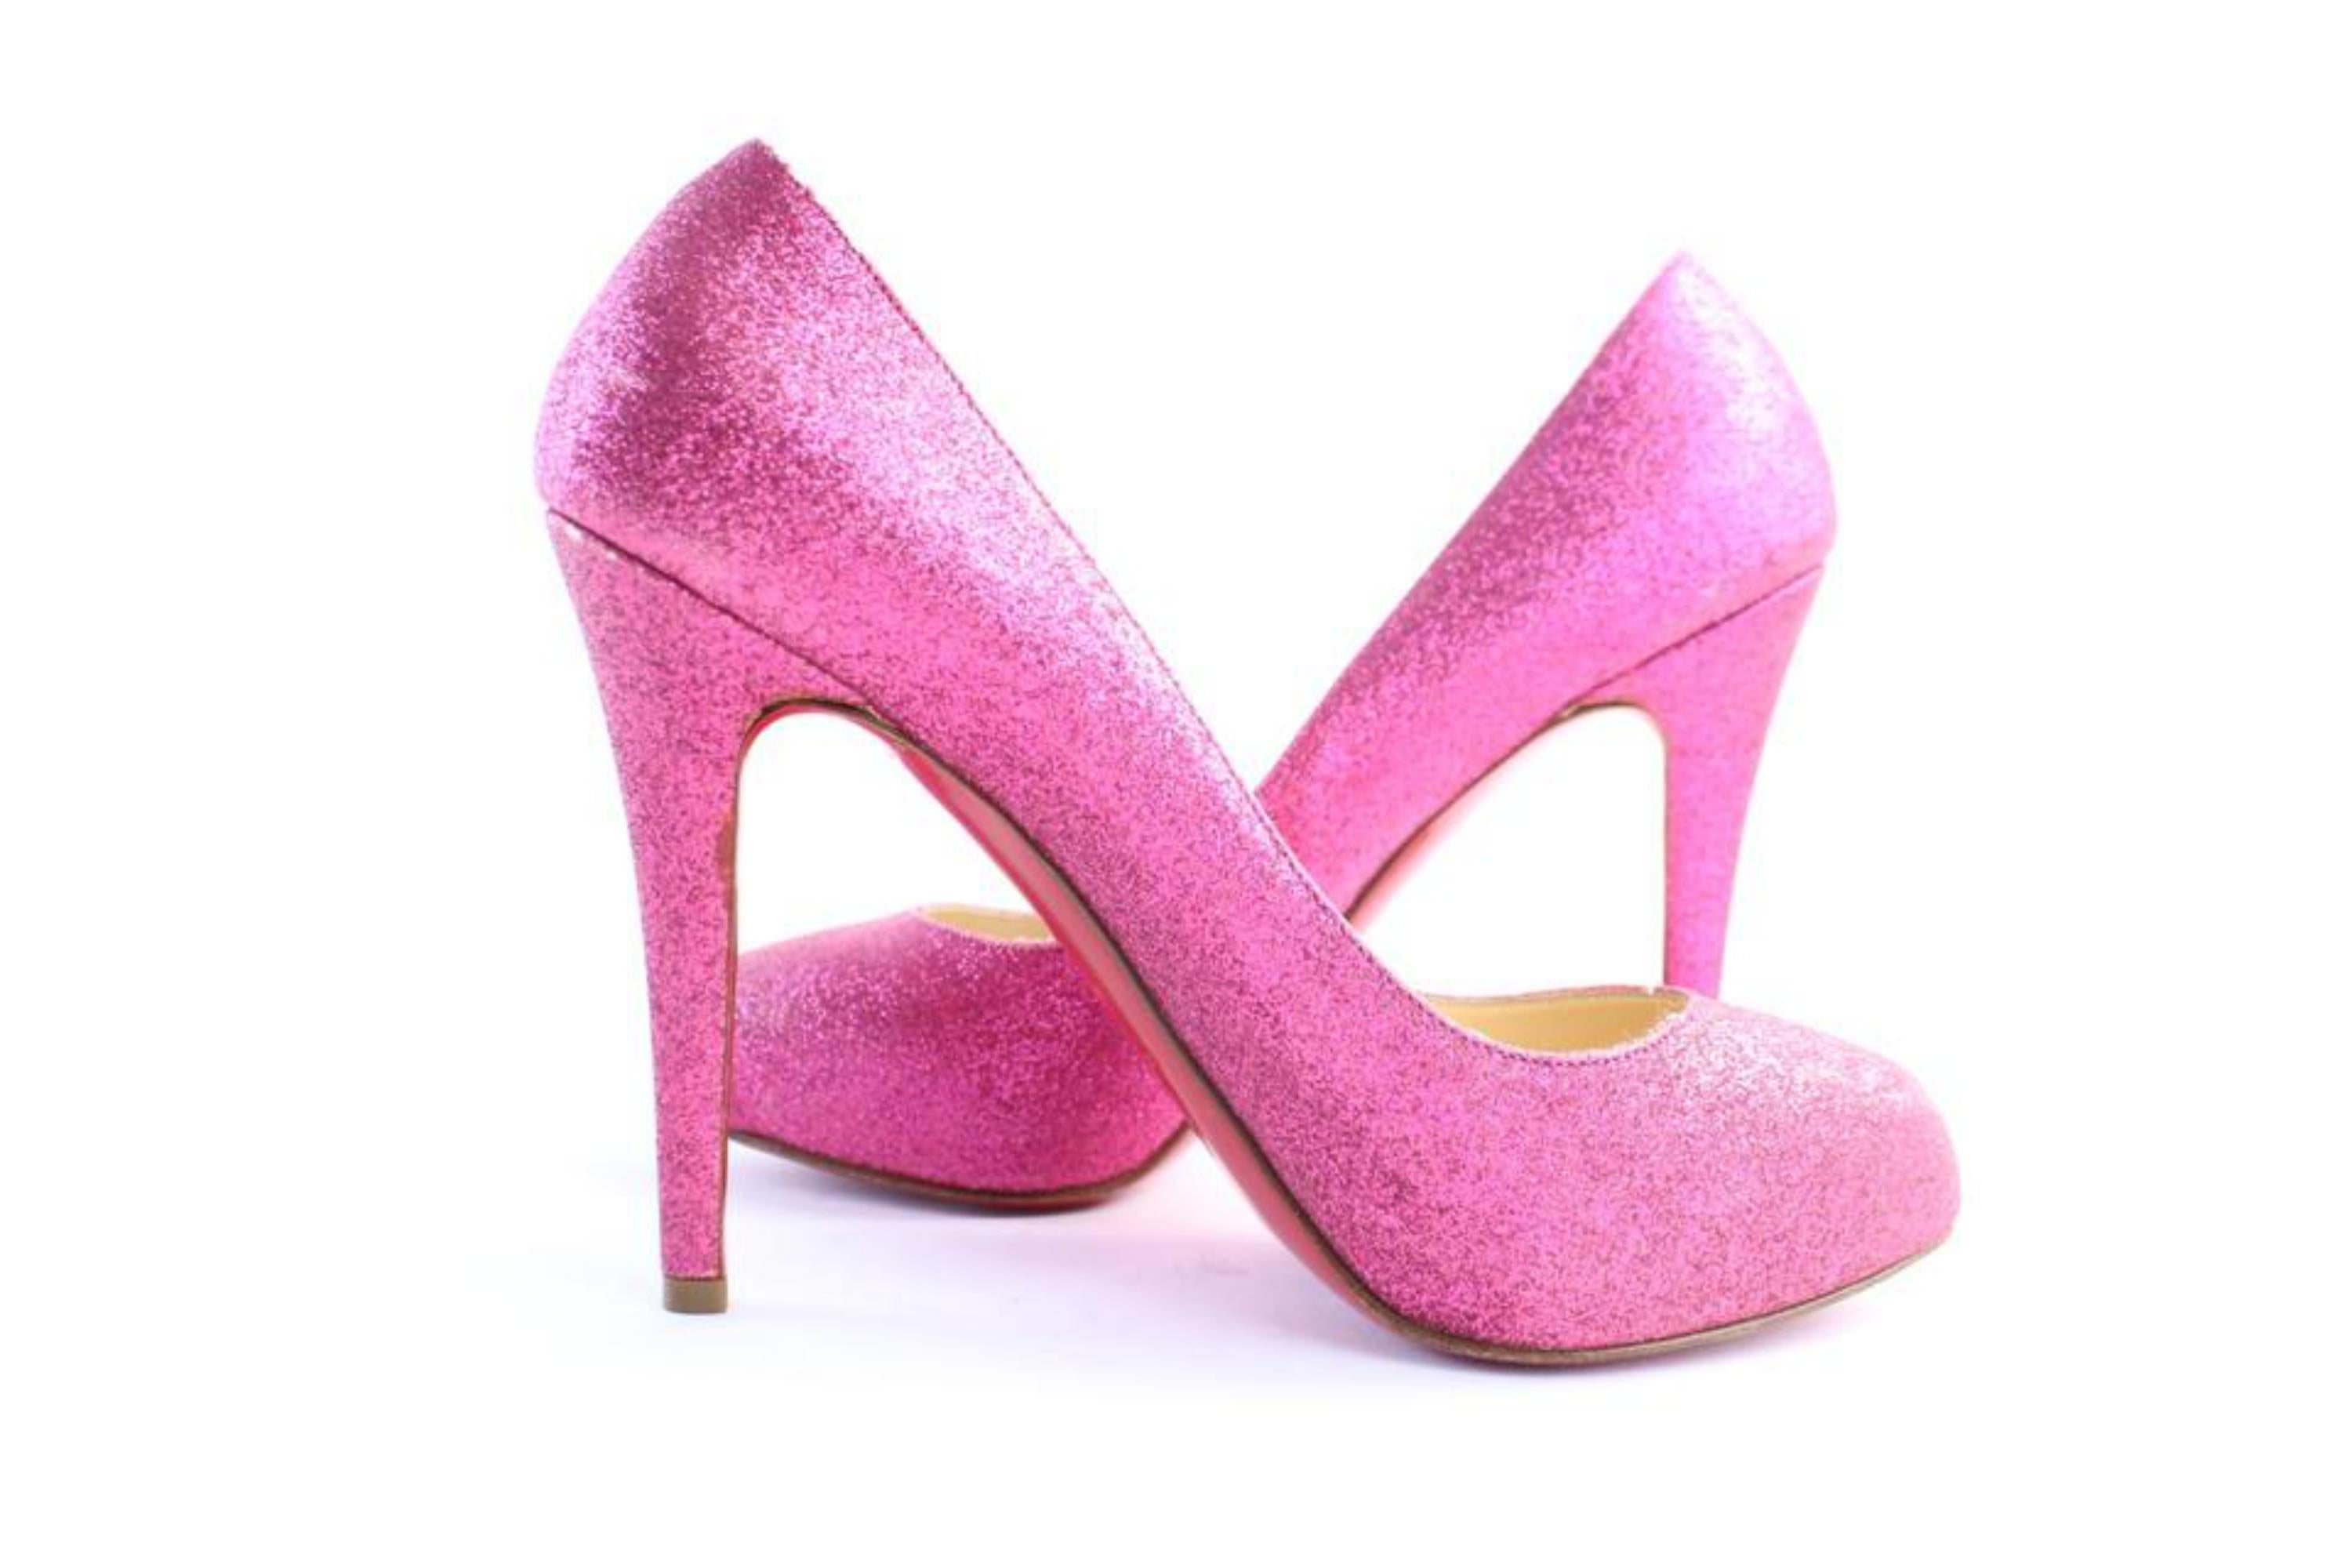 Christian Louboutin Pink Fuschia Fifi Glitter 13clr0509 Pumps In Excellent Condition For Sale In Forest Hills, NY